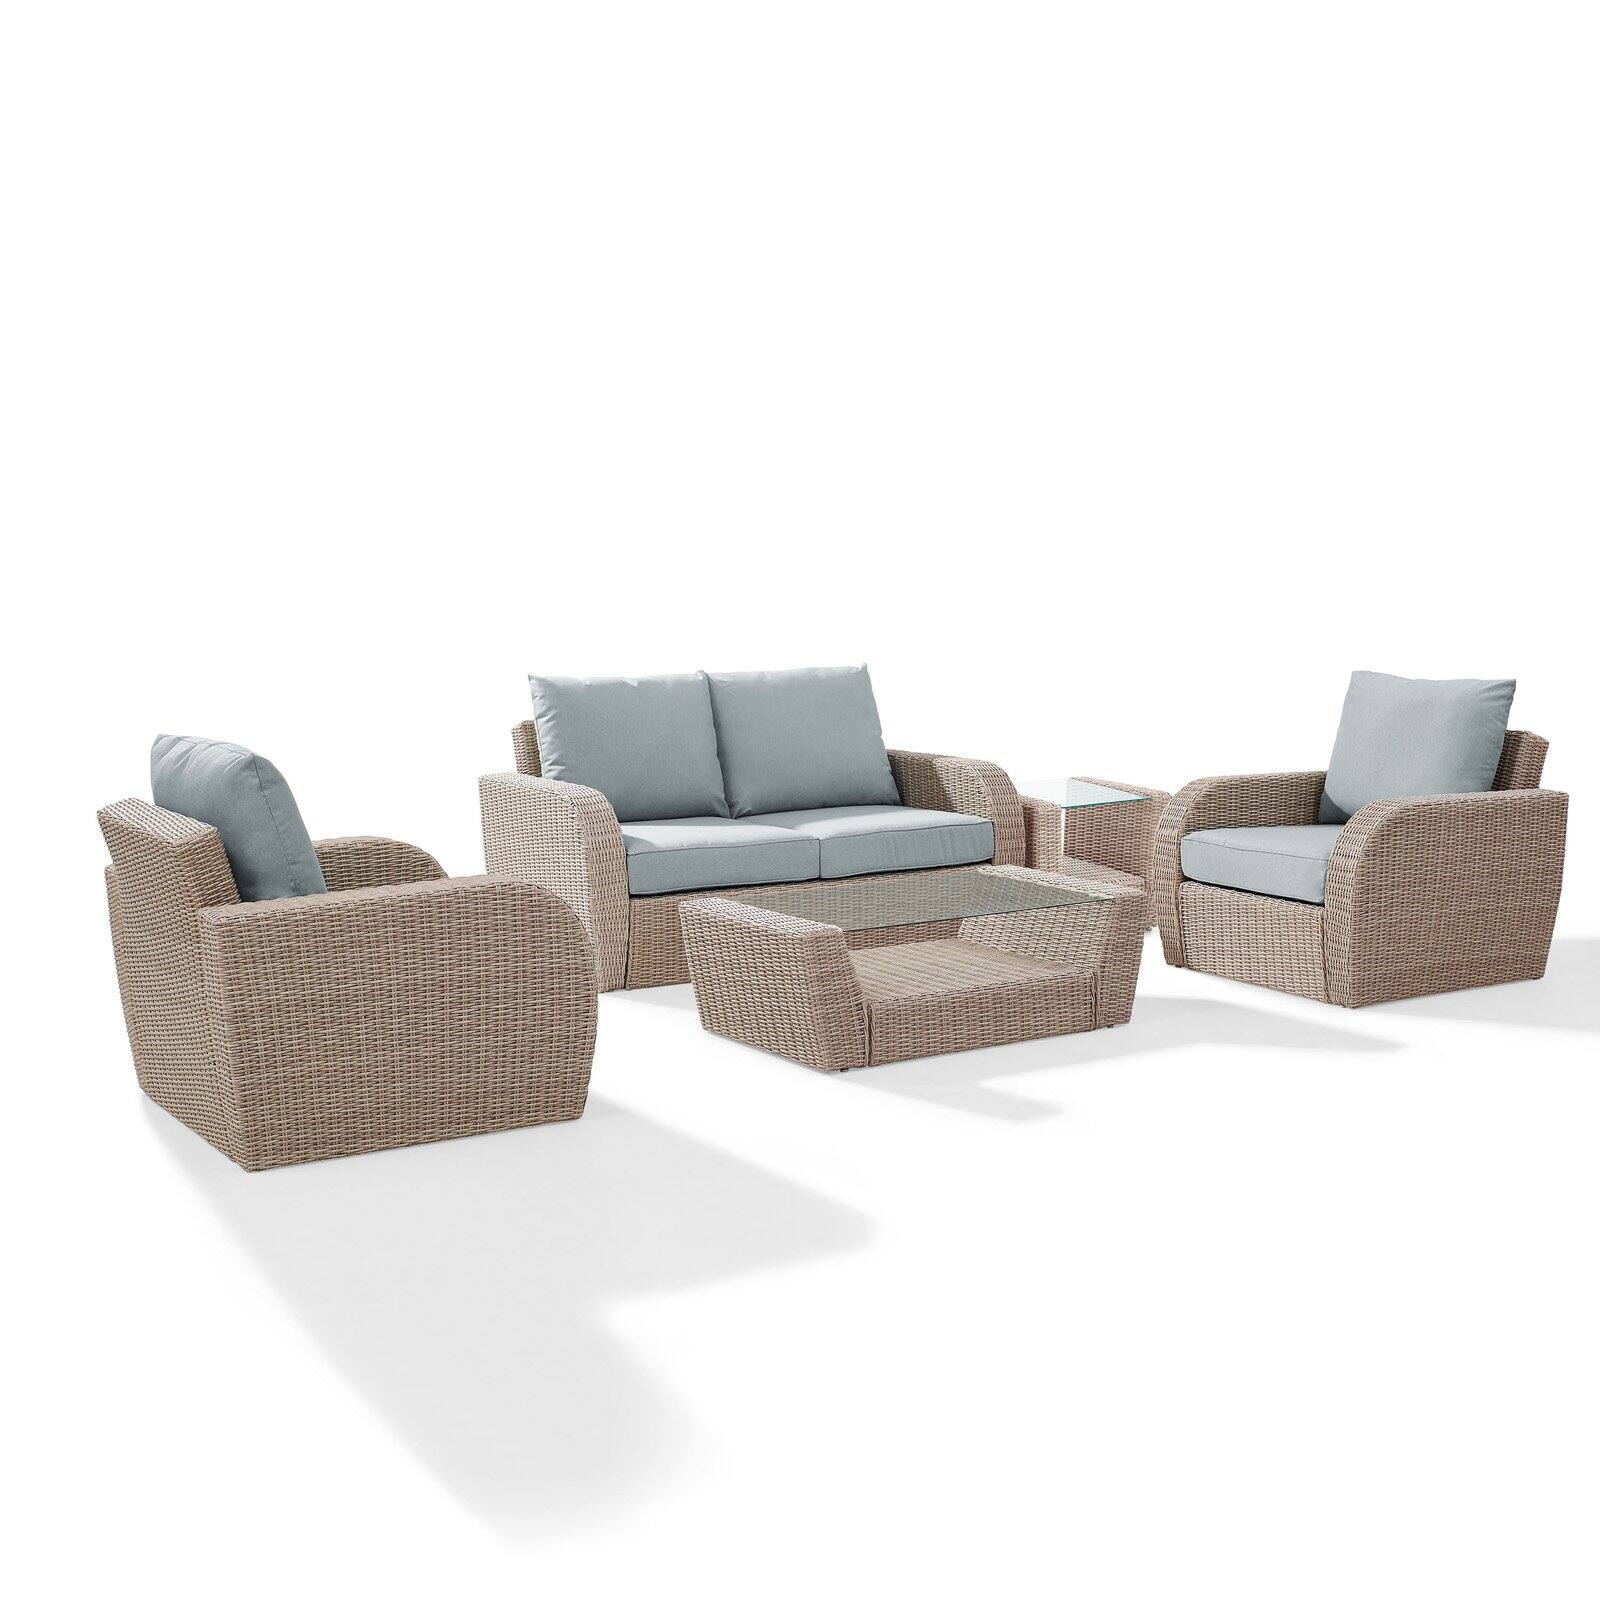 Crosley Furniture St Augustine 5 Pc Outdoor Wicker Seating Set With Oatmeal Cushion - Loveseat, Two Chairs, Coffee Table, Side Table - image 4 of 11